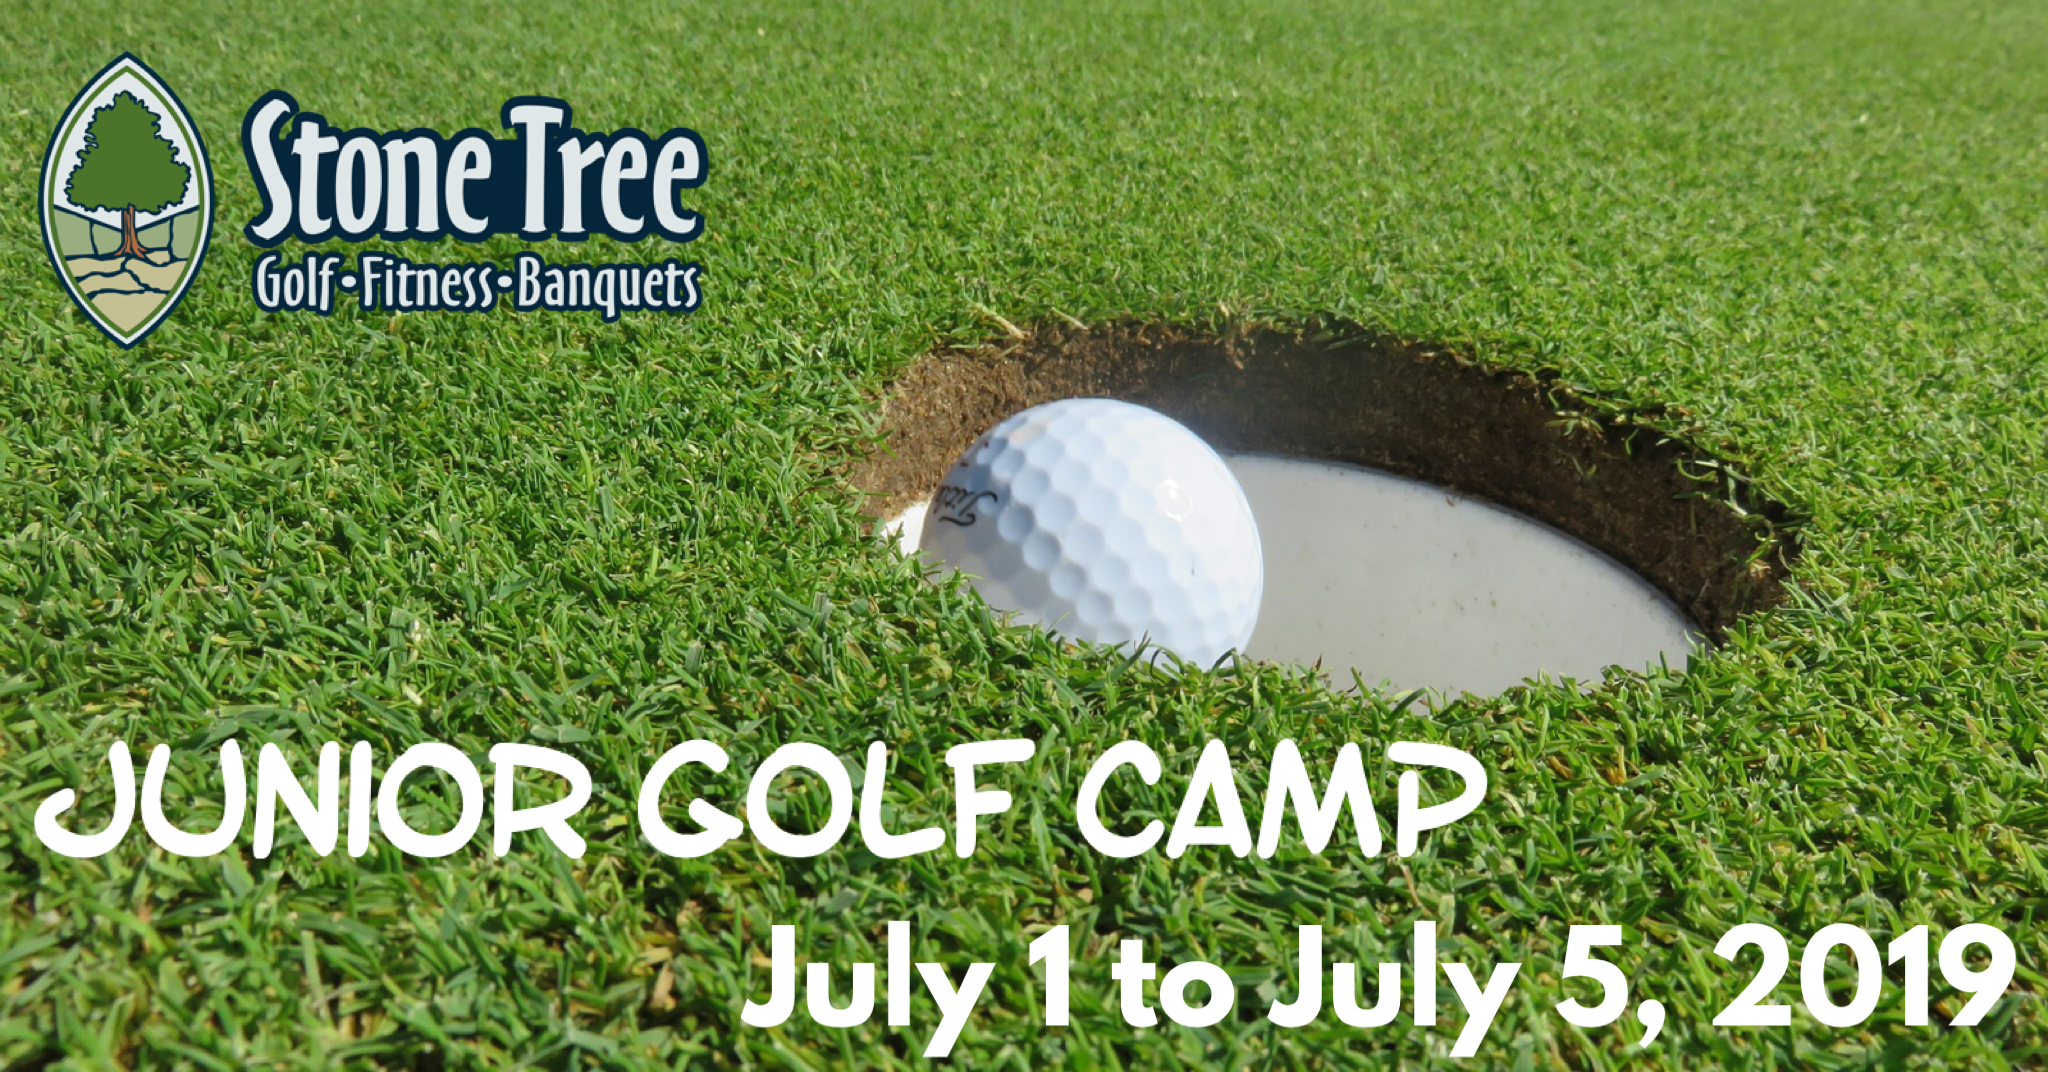 Junior Golf Camp - July 22 to July 26, 2019